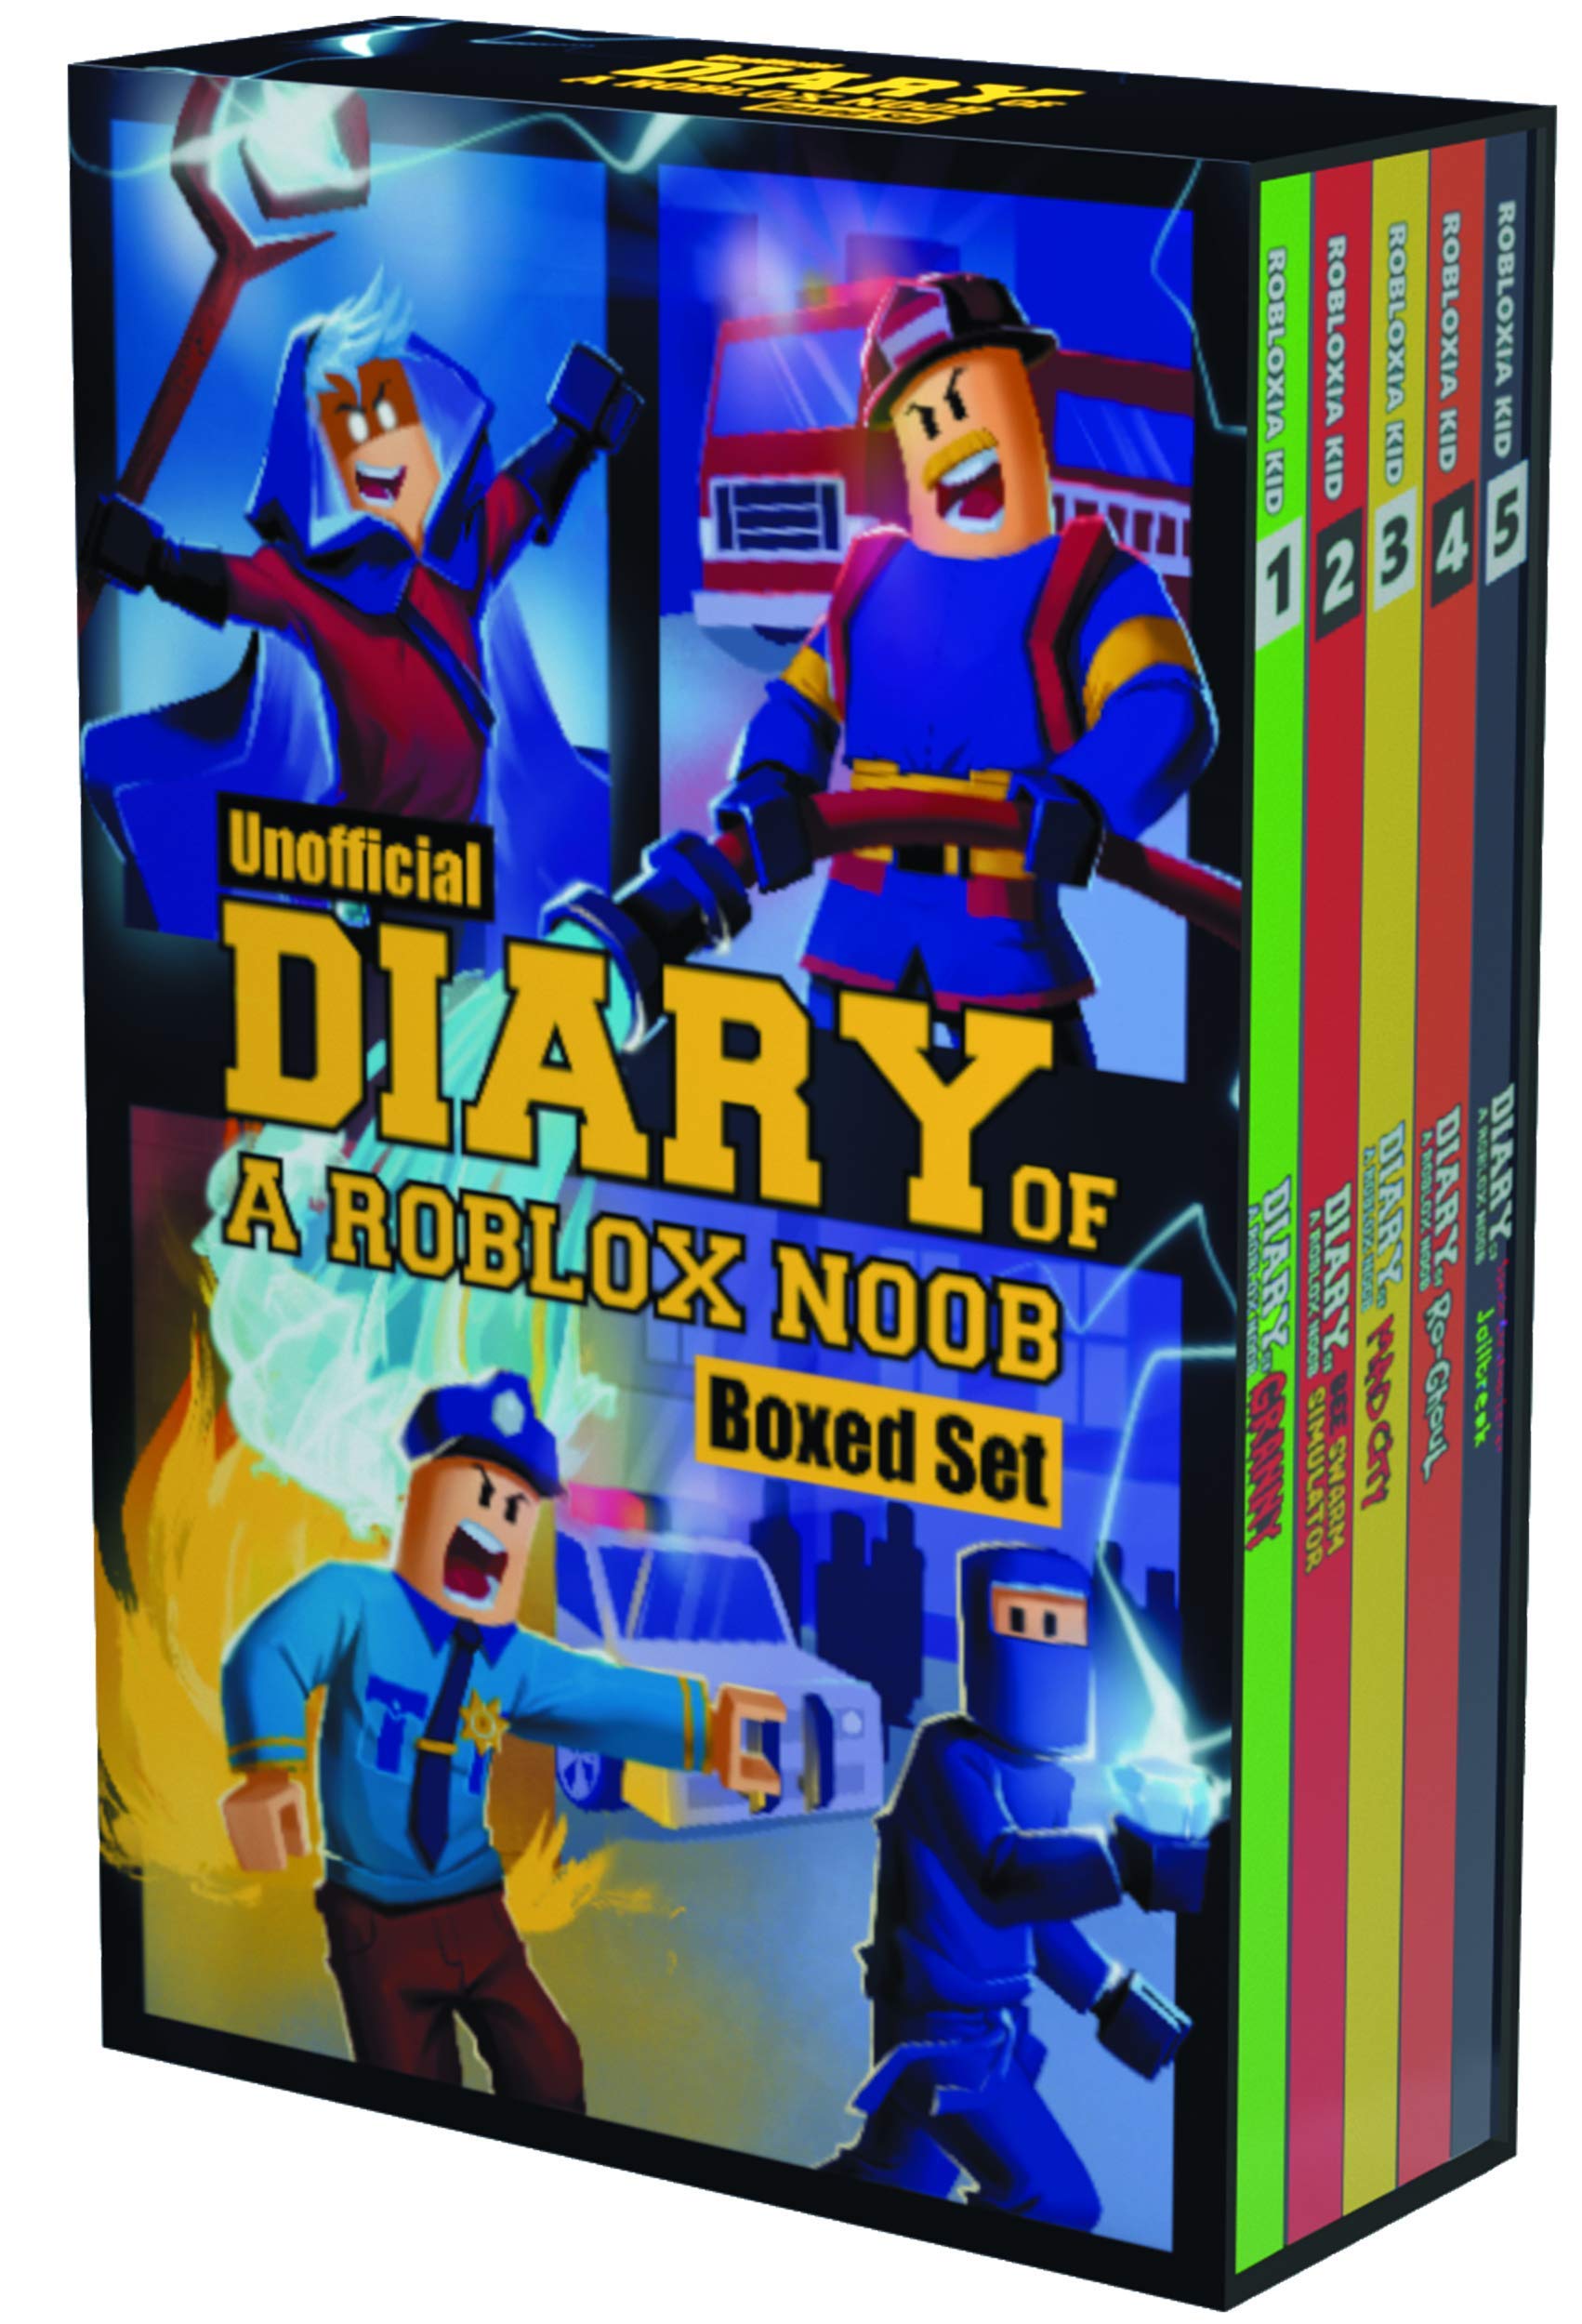  Robloxia Kid Diary of a Roblox Noob (Part 1): 5 Books